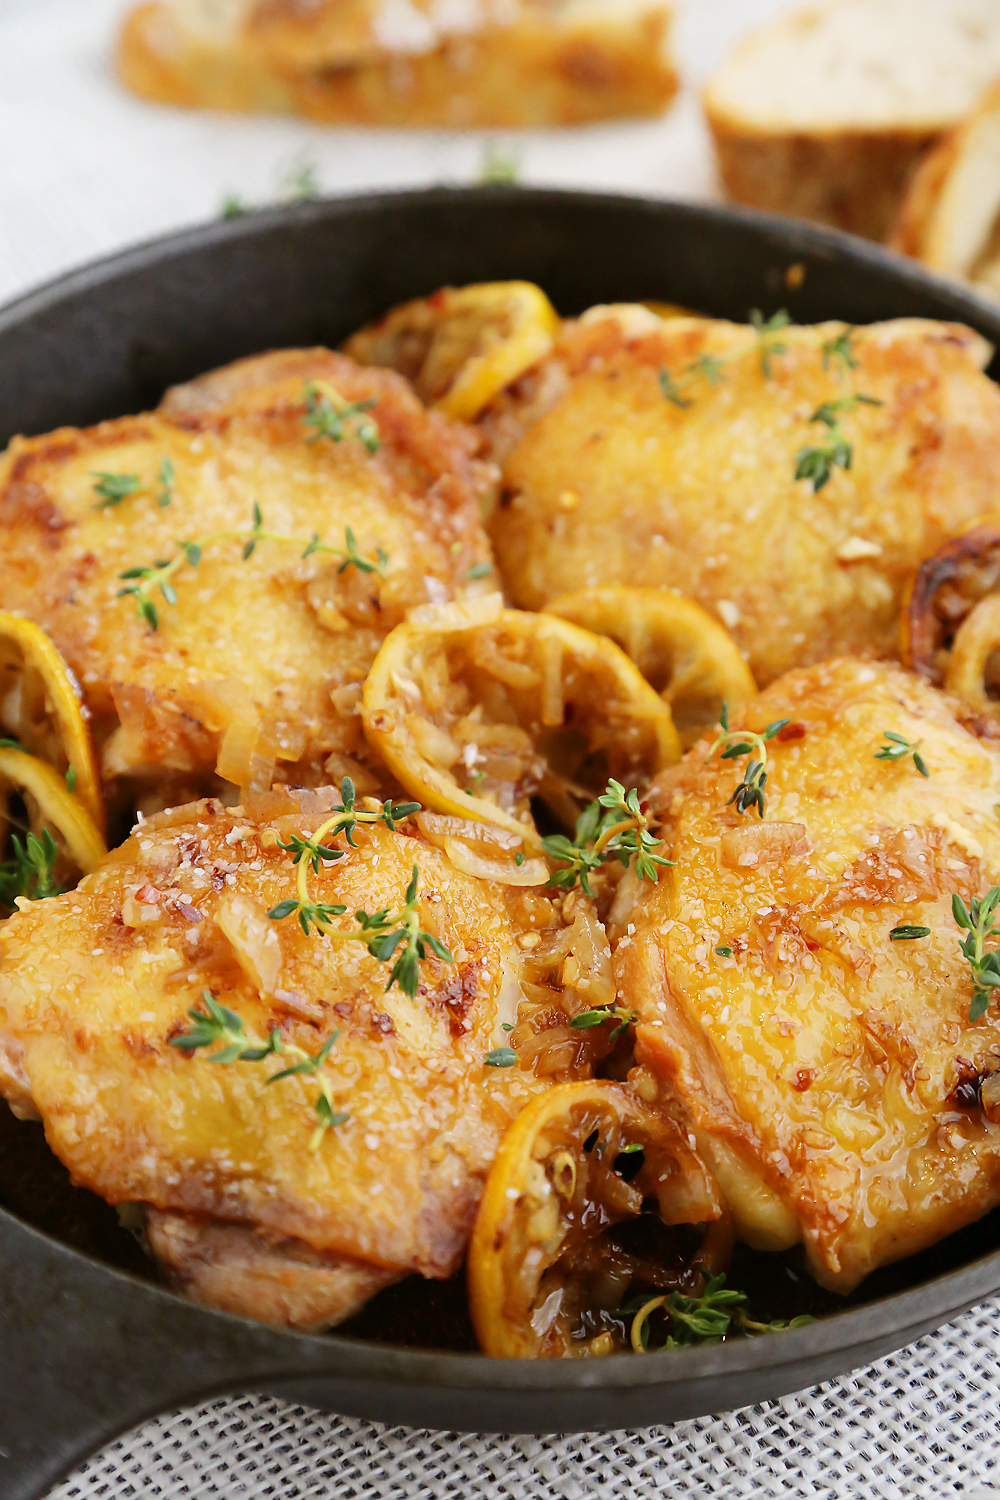 Skillet Crispy Lemon Chicken with White Wine Sauce - This one-skillet dish is deliciously easy for weeknights or elegant dinners in. Serve w. crusty bread for dipping! Thecomfortofcooking.com